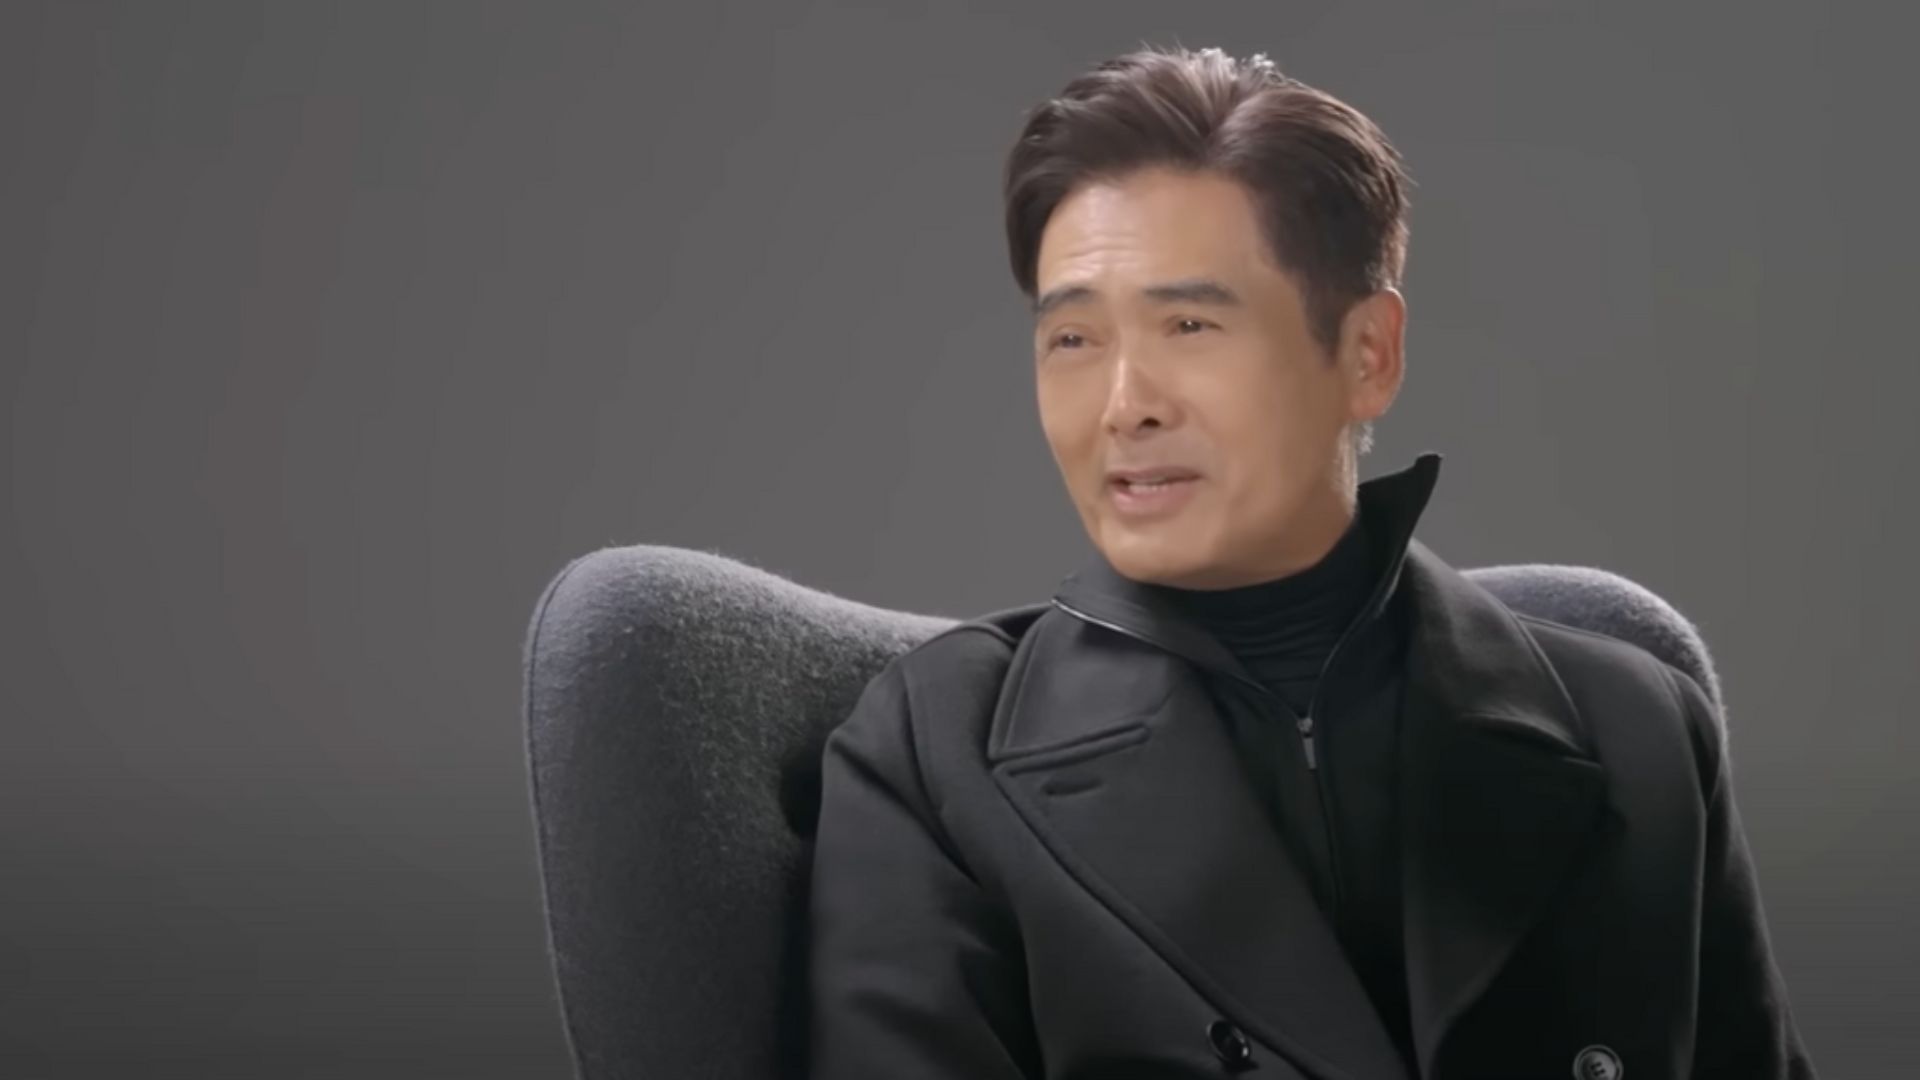 Chow Yun-Fat Siting On A Black Chair